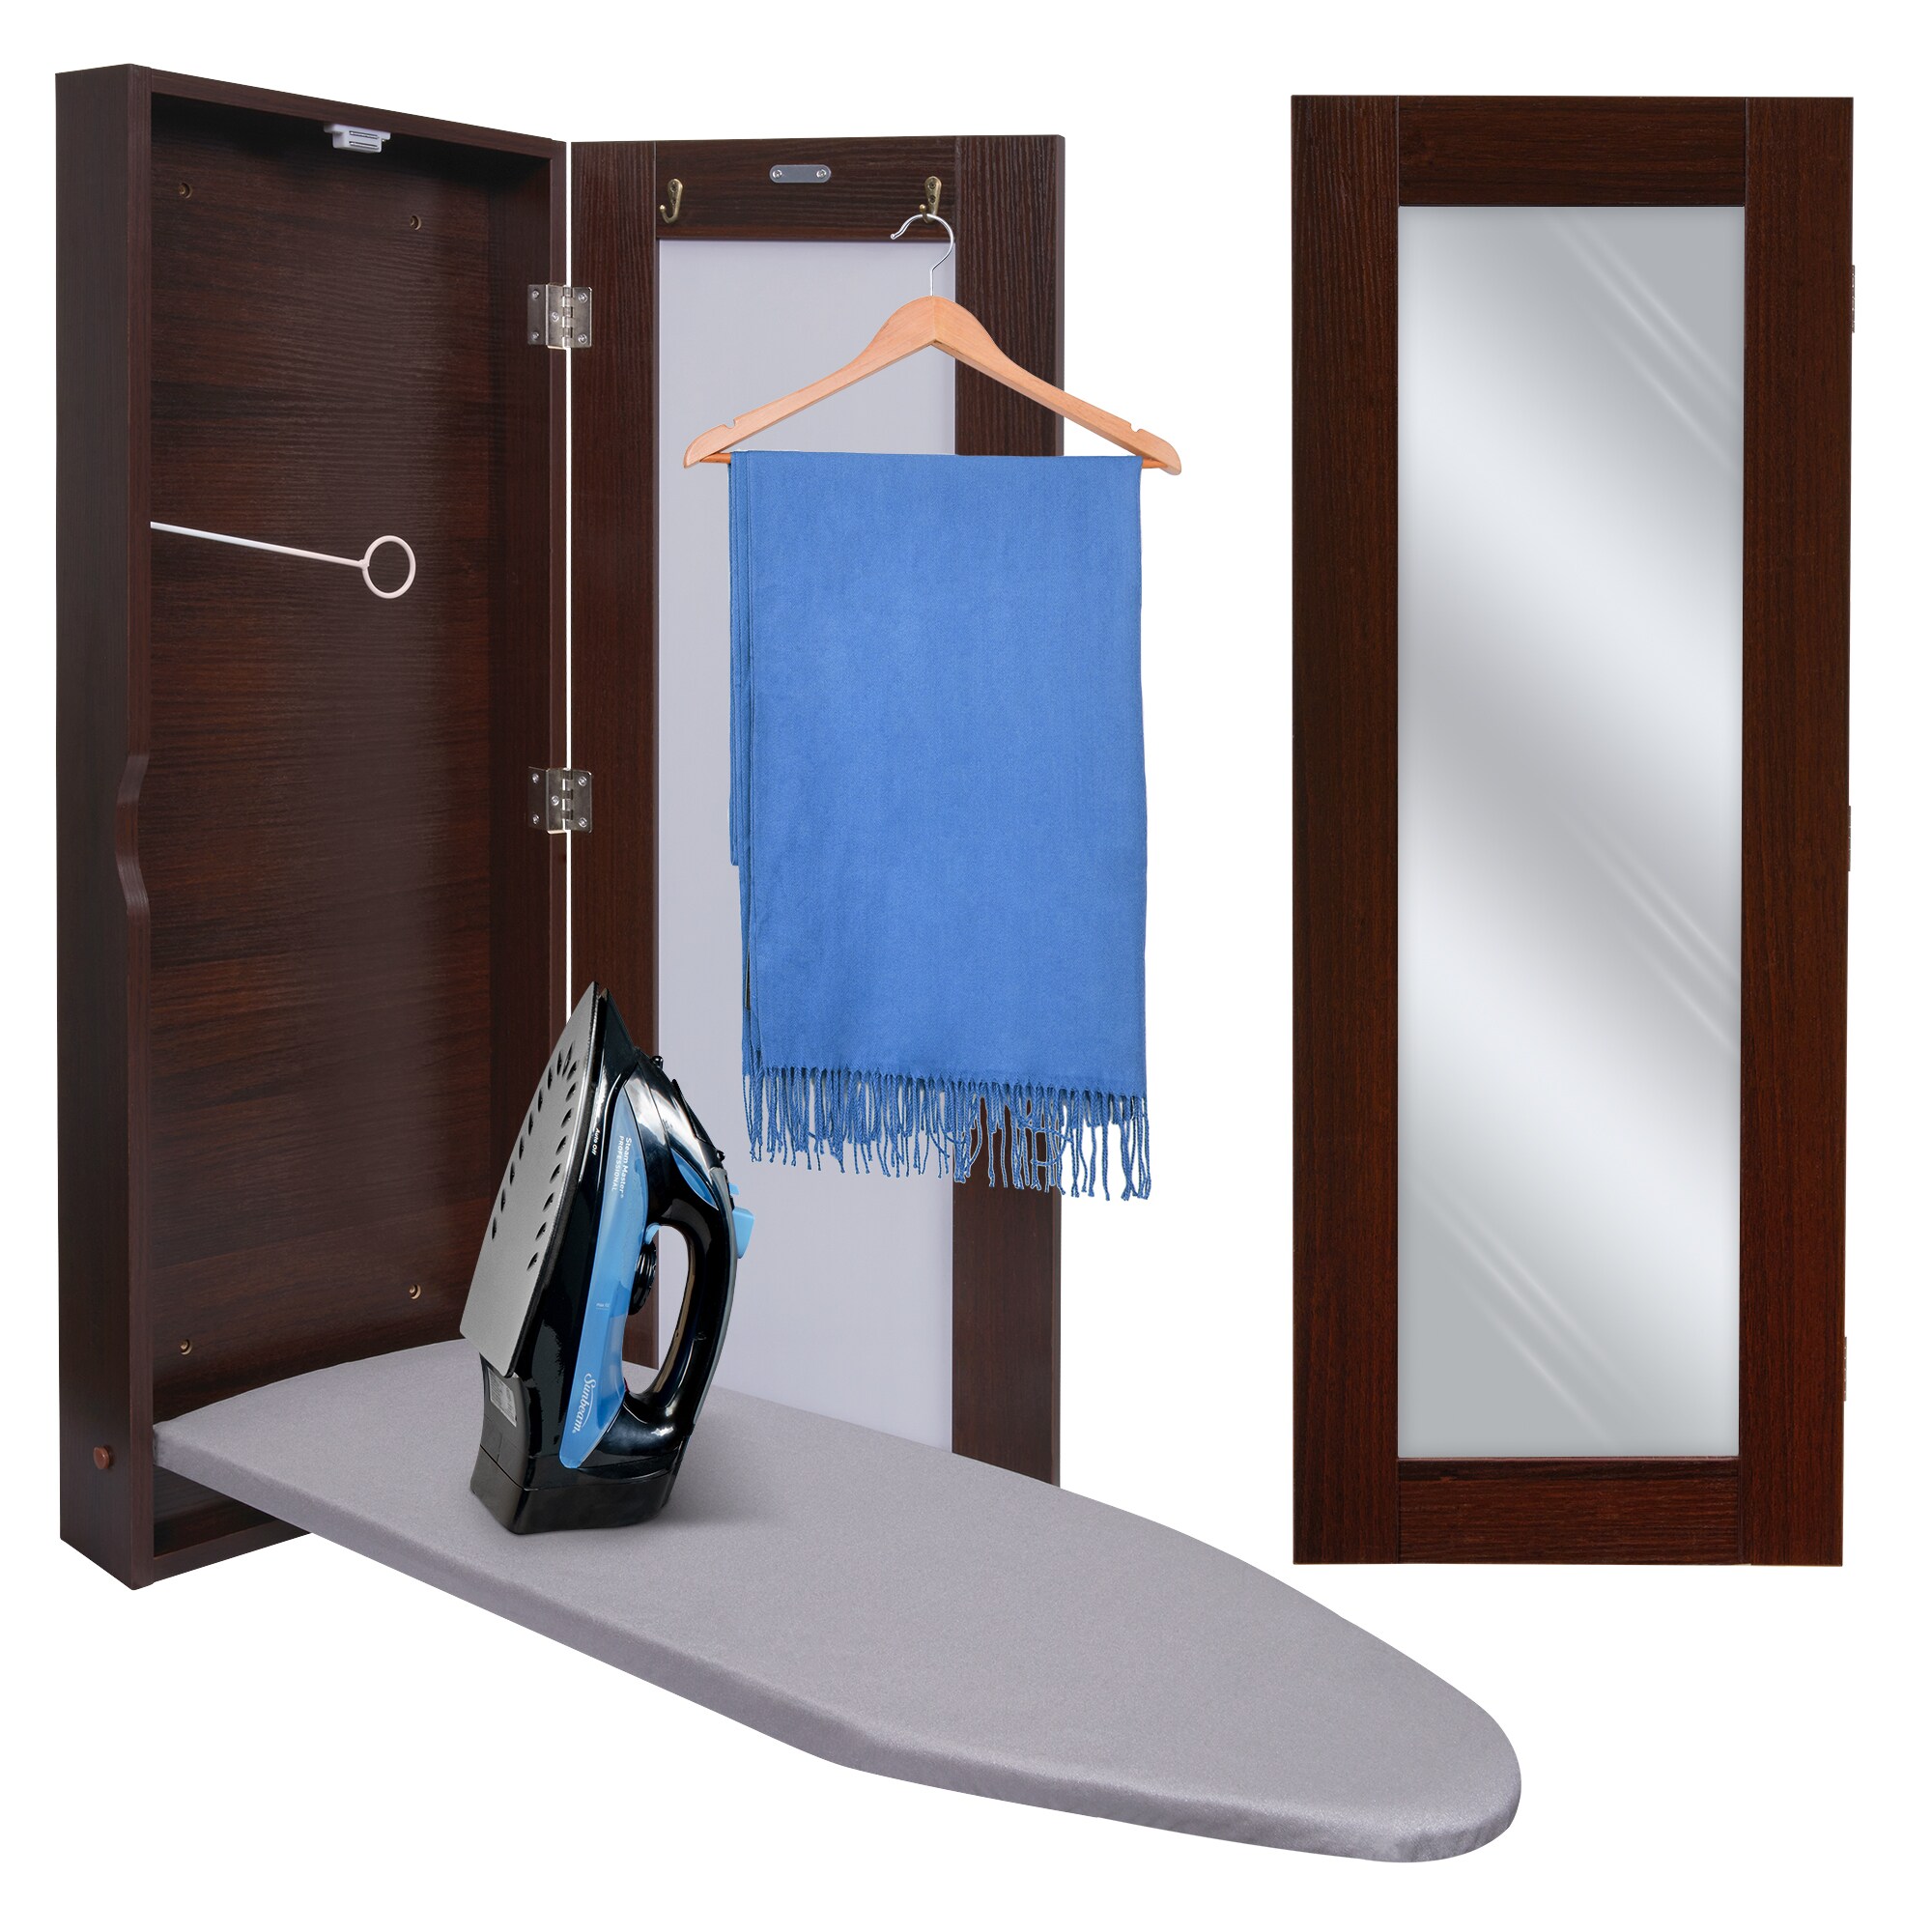 Details about   Foldable Wall Mountable Ironing Board Shelf 180° Rotation W/ Ironing Board Cover 